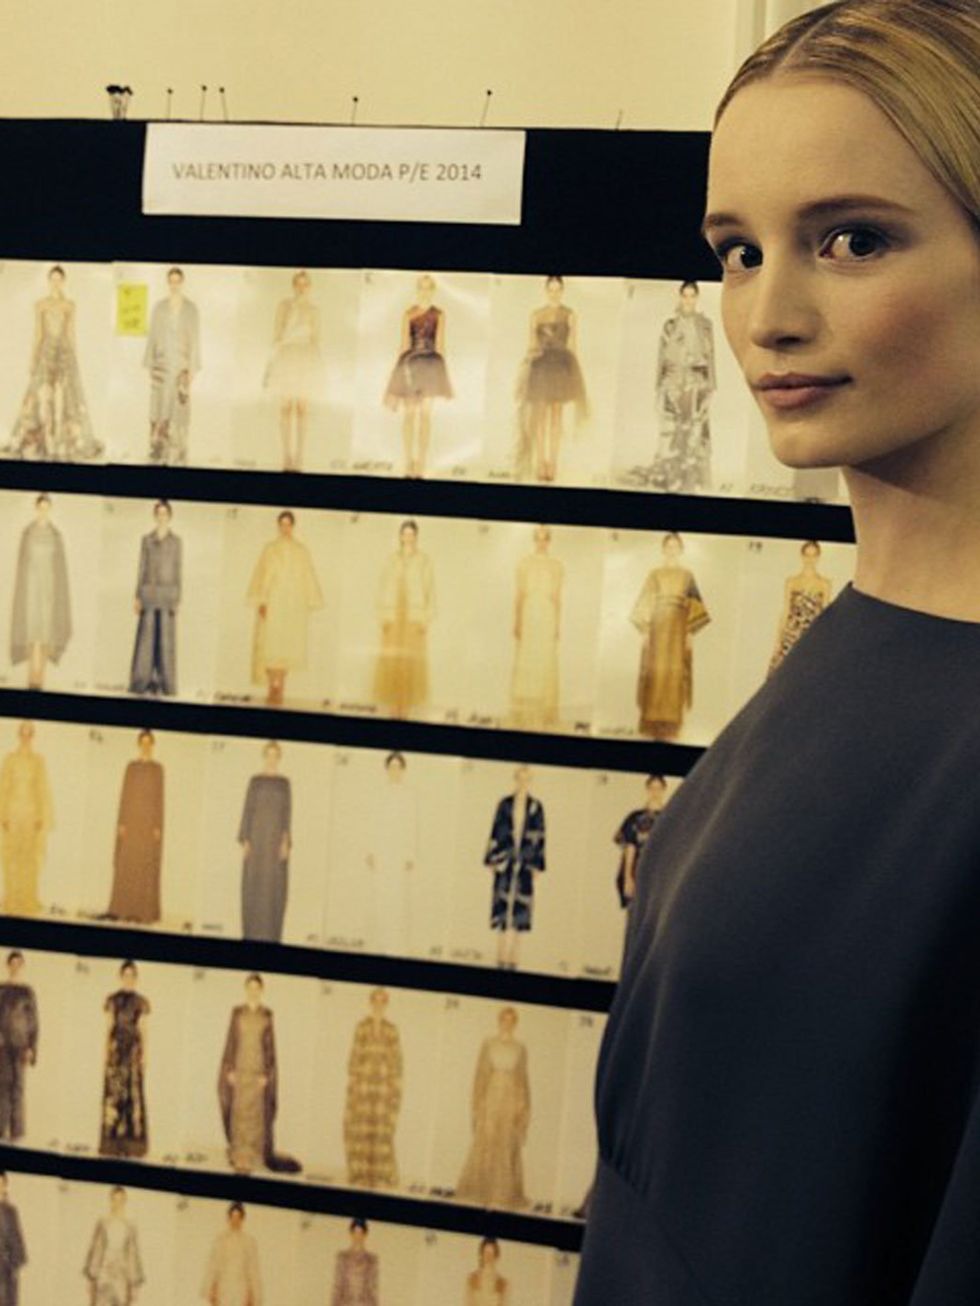 <p>Valentino (@<a href="http://hashgr.am/u/maisonvalentino?i_user_id=39939022">maisonvalentino</a>):</p><p>'The beautiful Maude backstage post show. <a href="http://hashgr.am/u/maudwelzen">@maudwelzen</a> if you missed the show you can catch it again on l